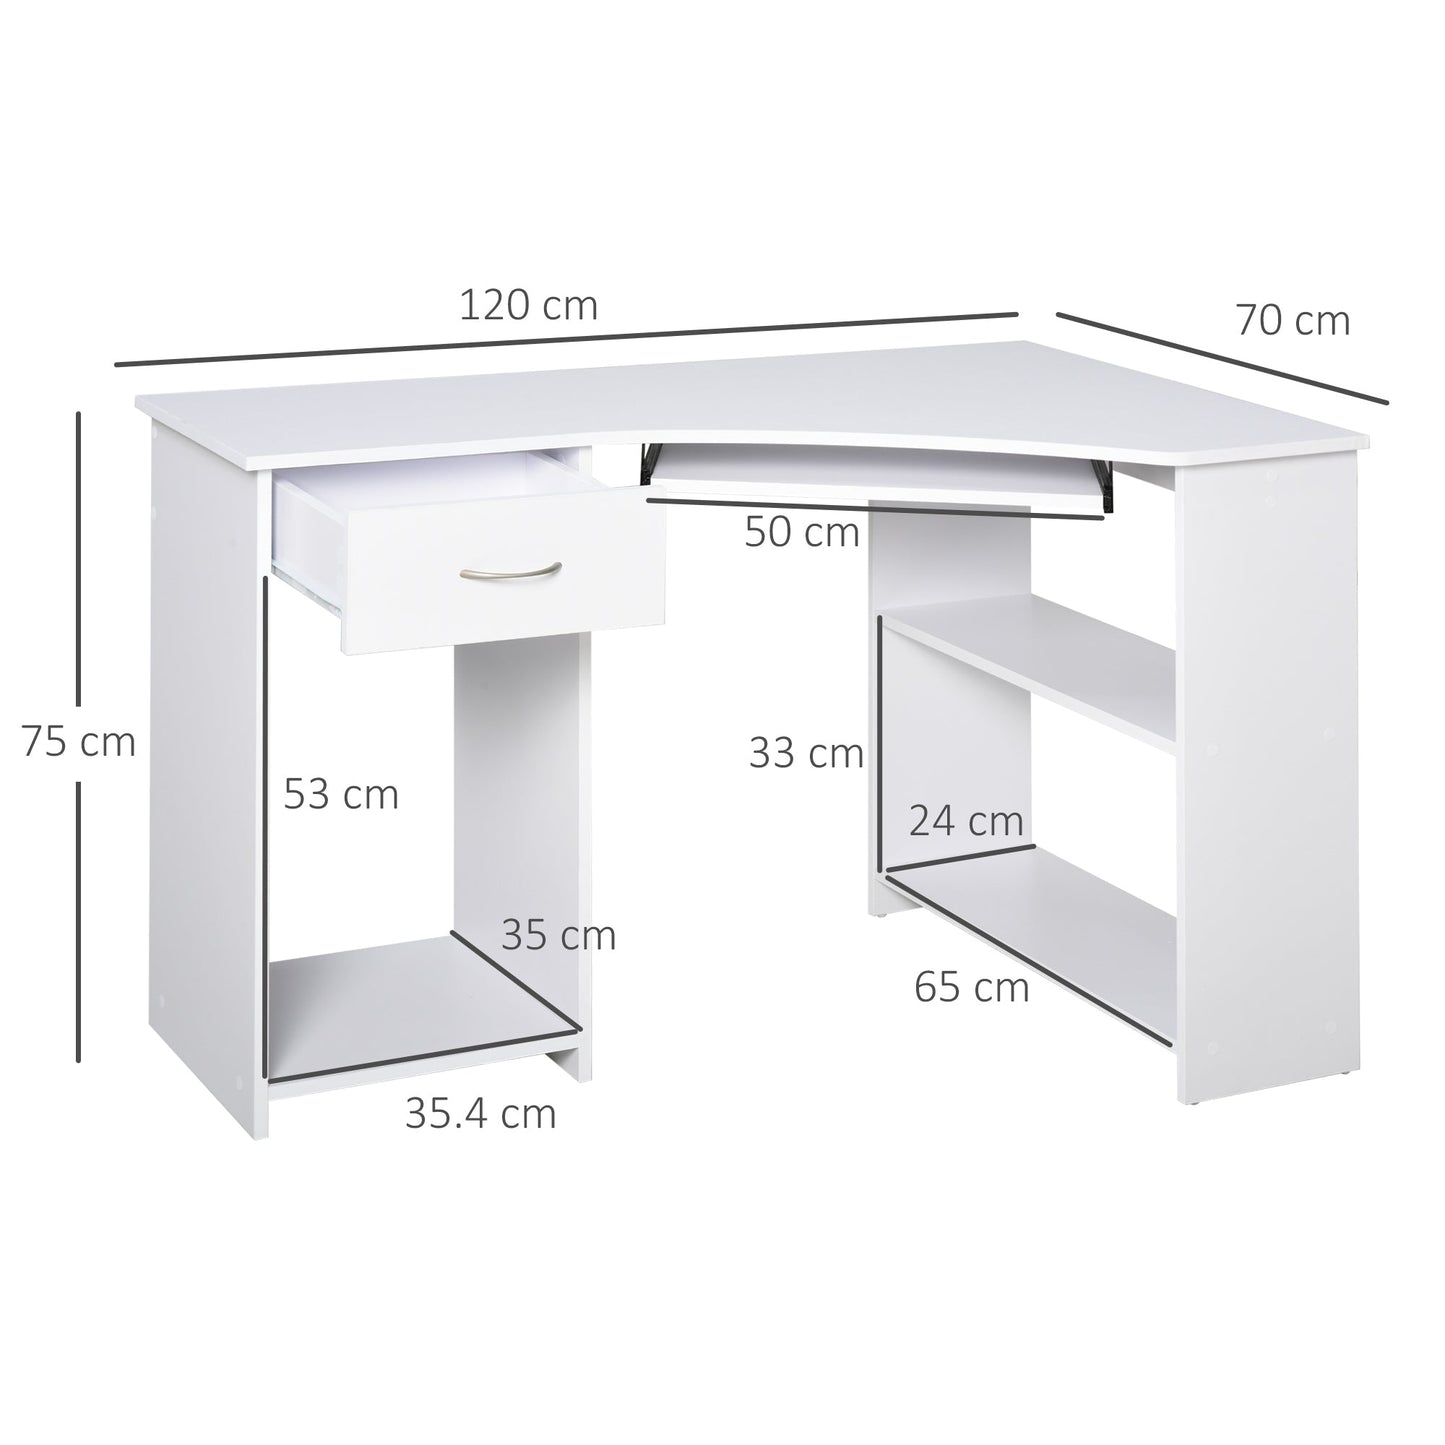 ProperAV Extra L-Shaped Corner Computer Desk & 2-Tier Side Shelves Wide Table Top with Keyboard Tray Office Study Bedroom Furniture - White - maplin.co.uk